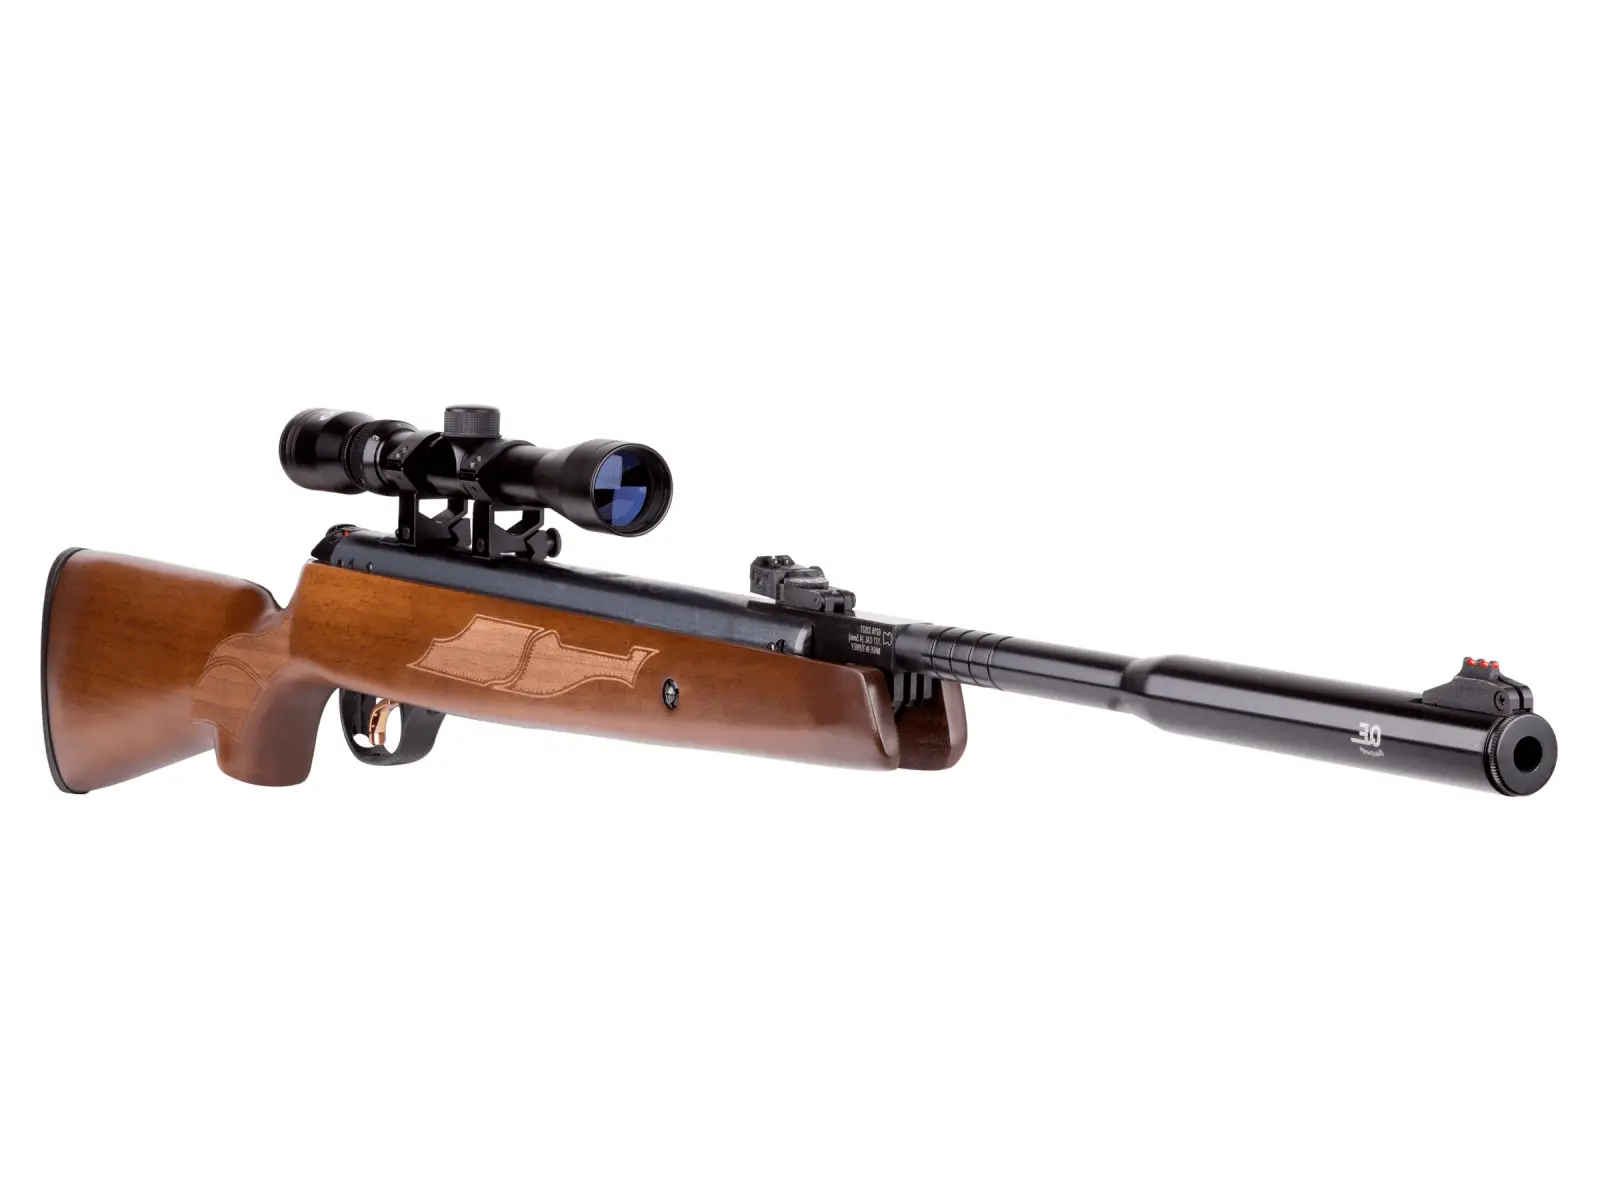 95 Best Air Rifles Under $200 - Top 5 budget guns for the money 2022 (Reviews and Buying Guide)